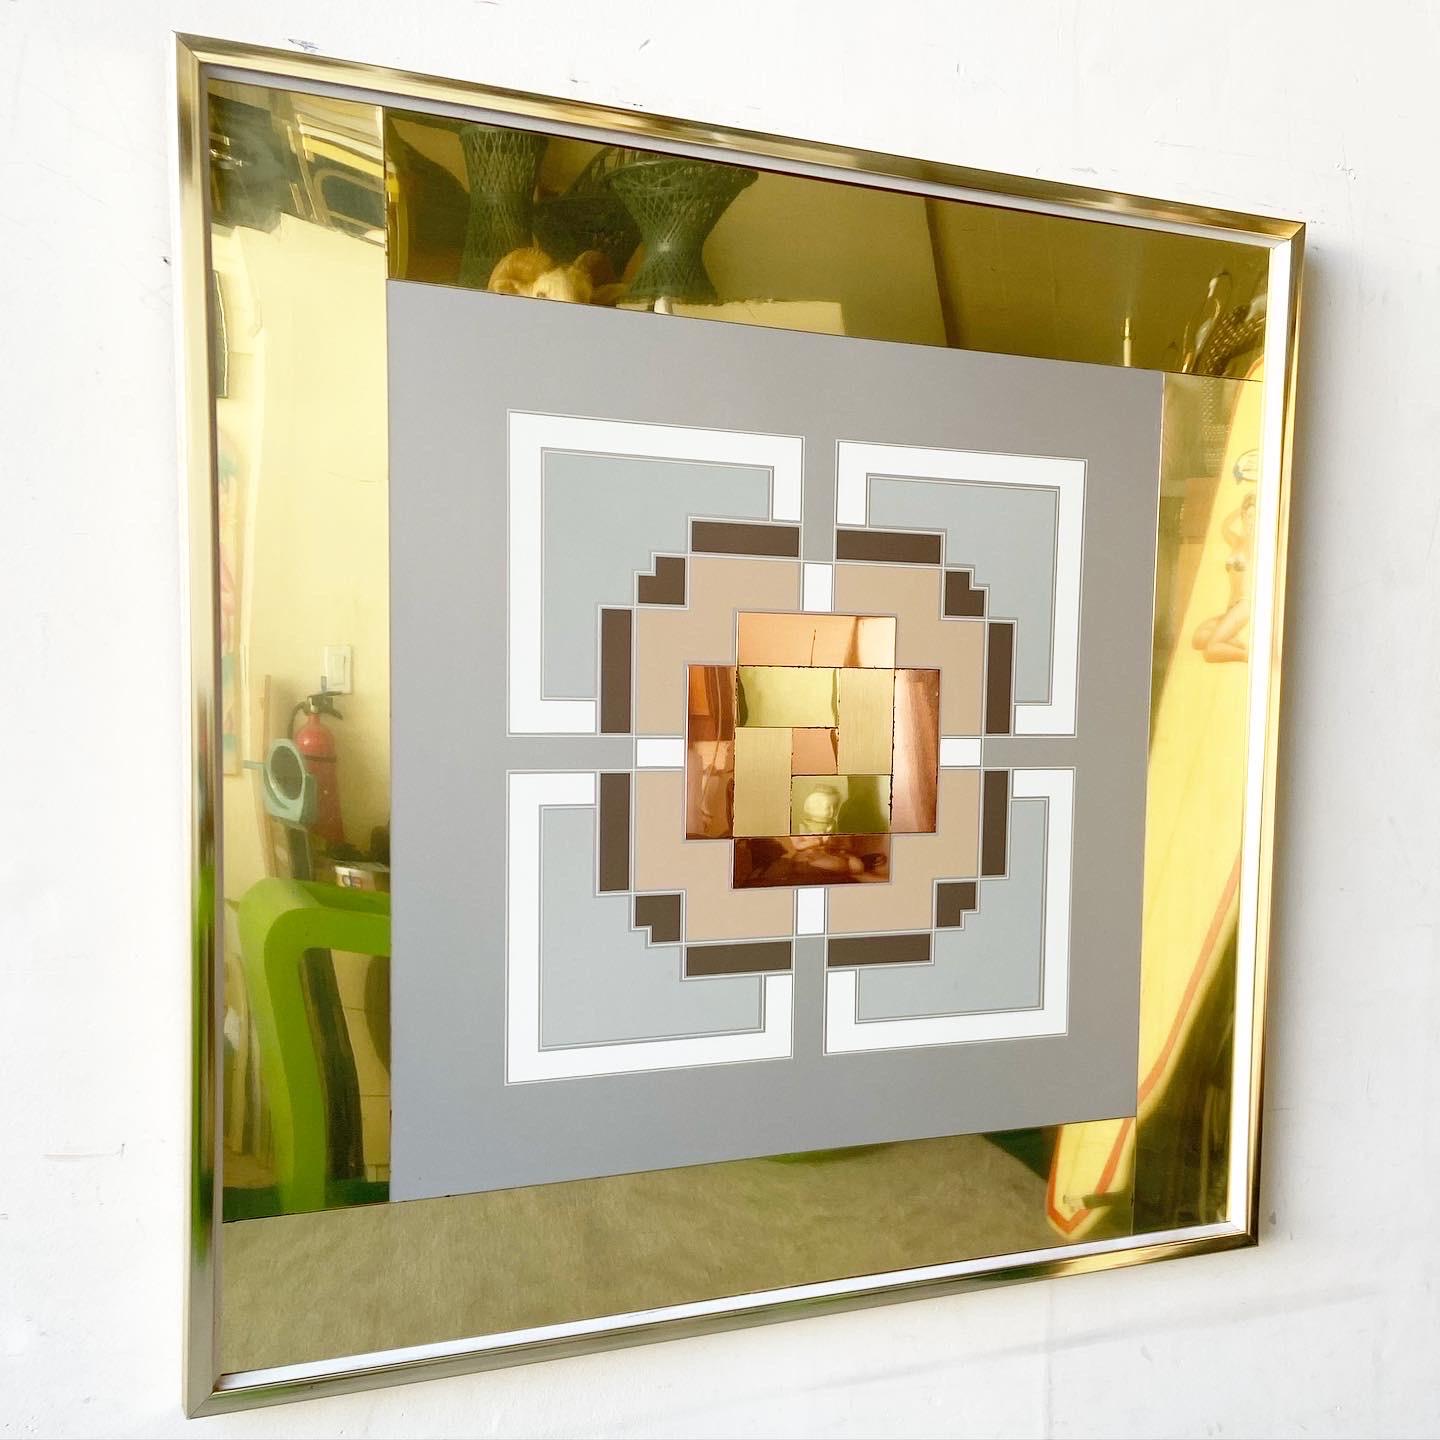 Exceptional Mid-Century Modern wall art by artist Greg Copeland. Features a fantastic display of squares and rectangles of gold, copper and silver tones.